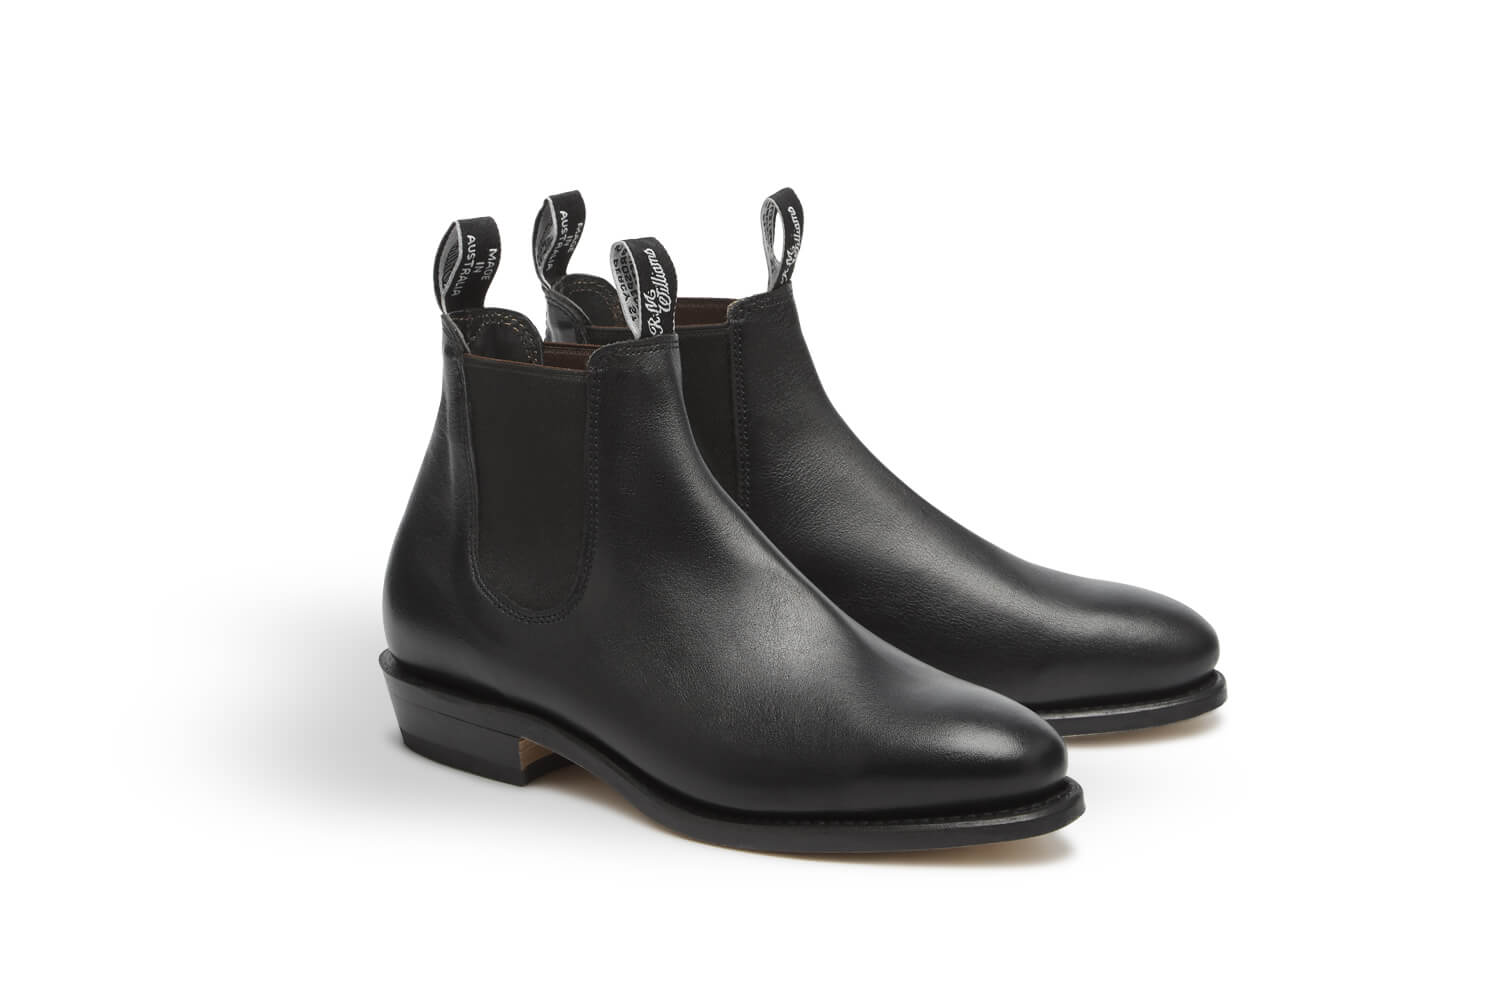 R.M.Williams handcrafted Adelaide boot